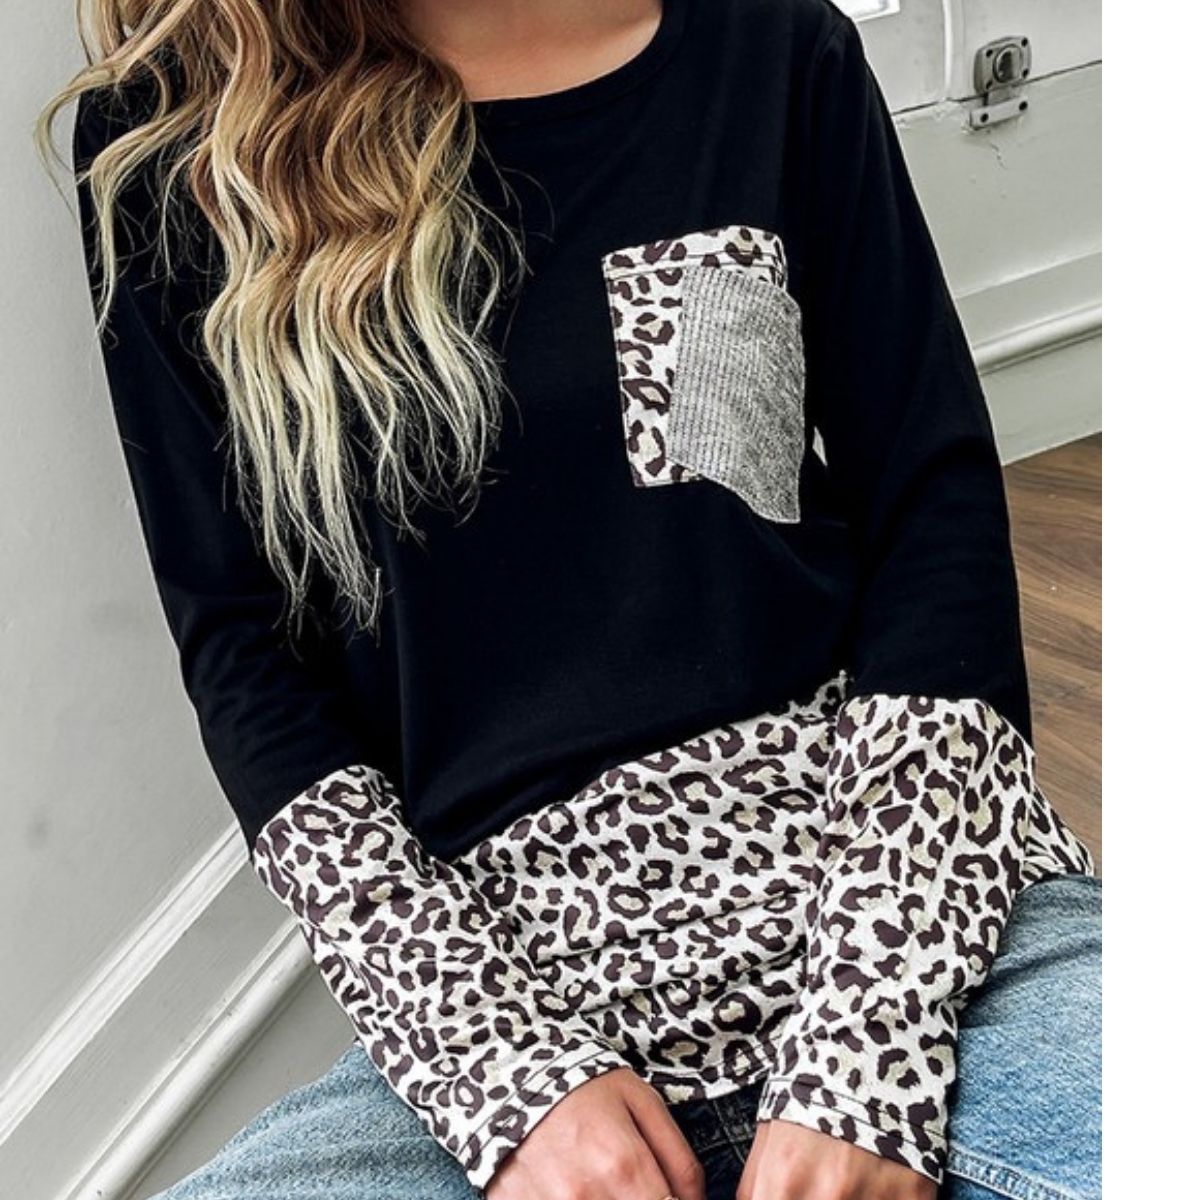 CASUAL BLACK AND LEOPARD POCKET TOP